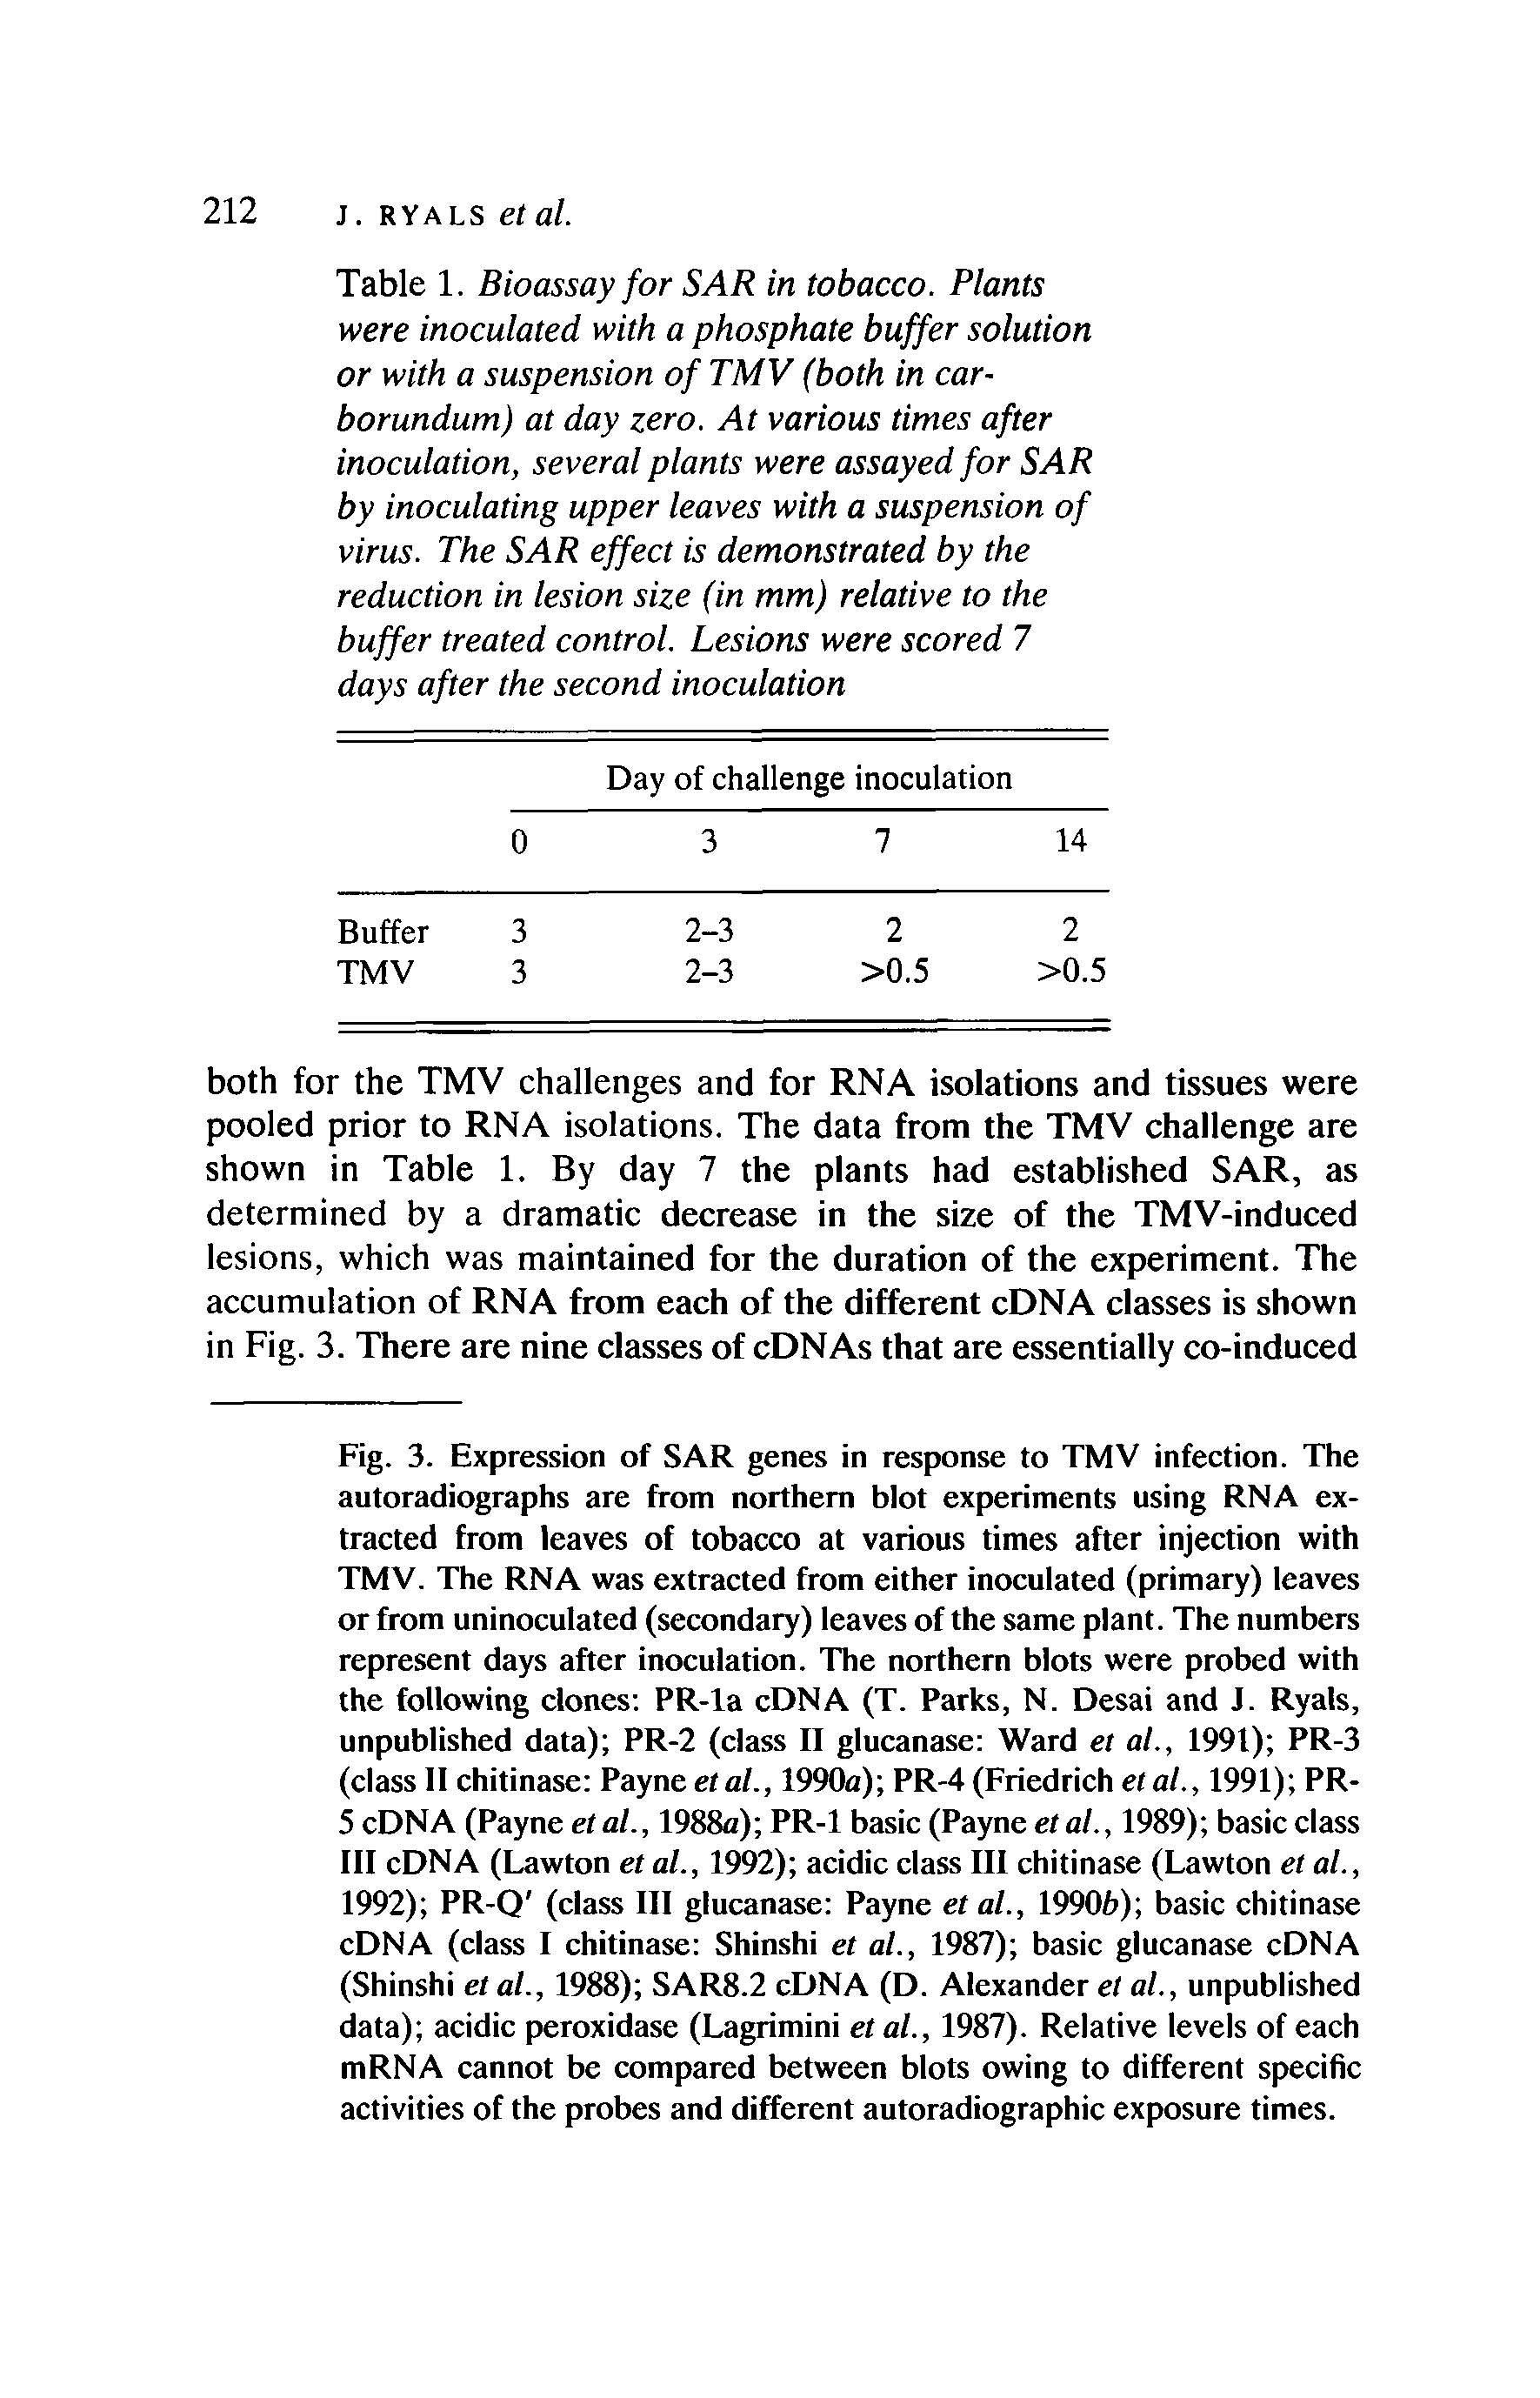 Table 1. Bioassay for SAR in tobacco. Plants were inoculated with a phosphate buffer solution or with a suspension of TMV (both in carborundum) at day zero. At various times after inoculation, several plants were assayed for SAR by inoculating upper leaves with a suspension of virus. The SAR effect is demonstrated by the reduction in lesion size (in mm) relative to the buffer treated control. Lesions were scored 7 days after the second inoculation...